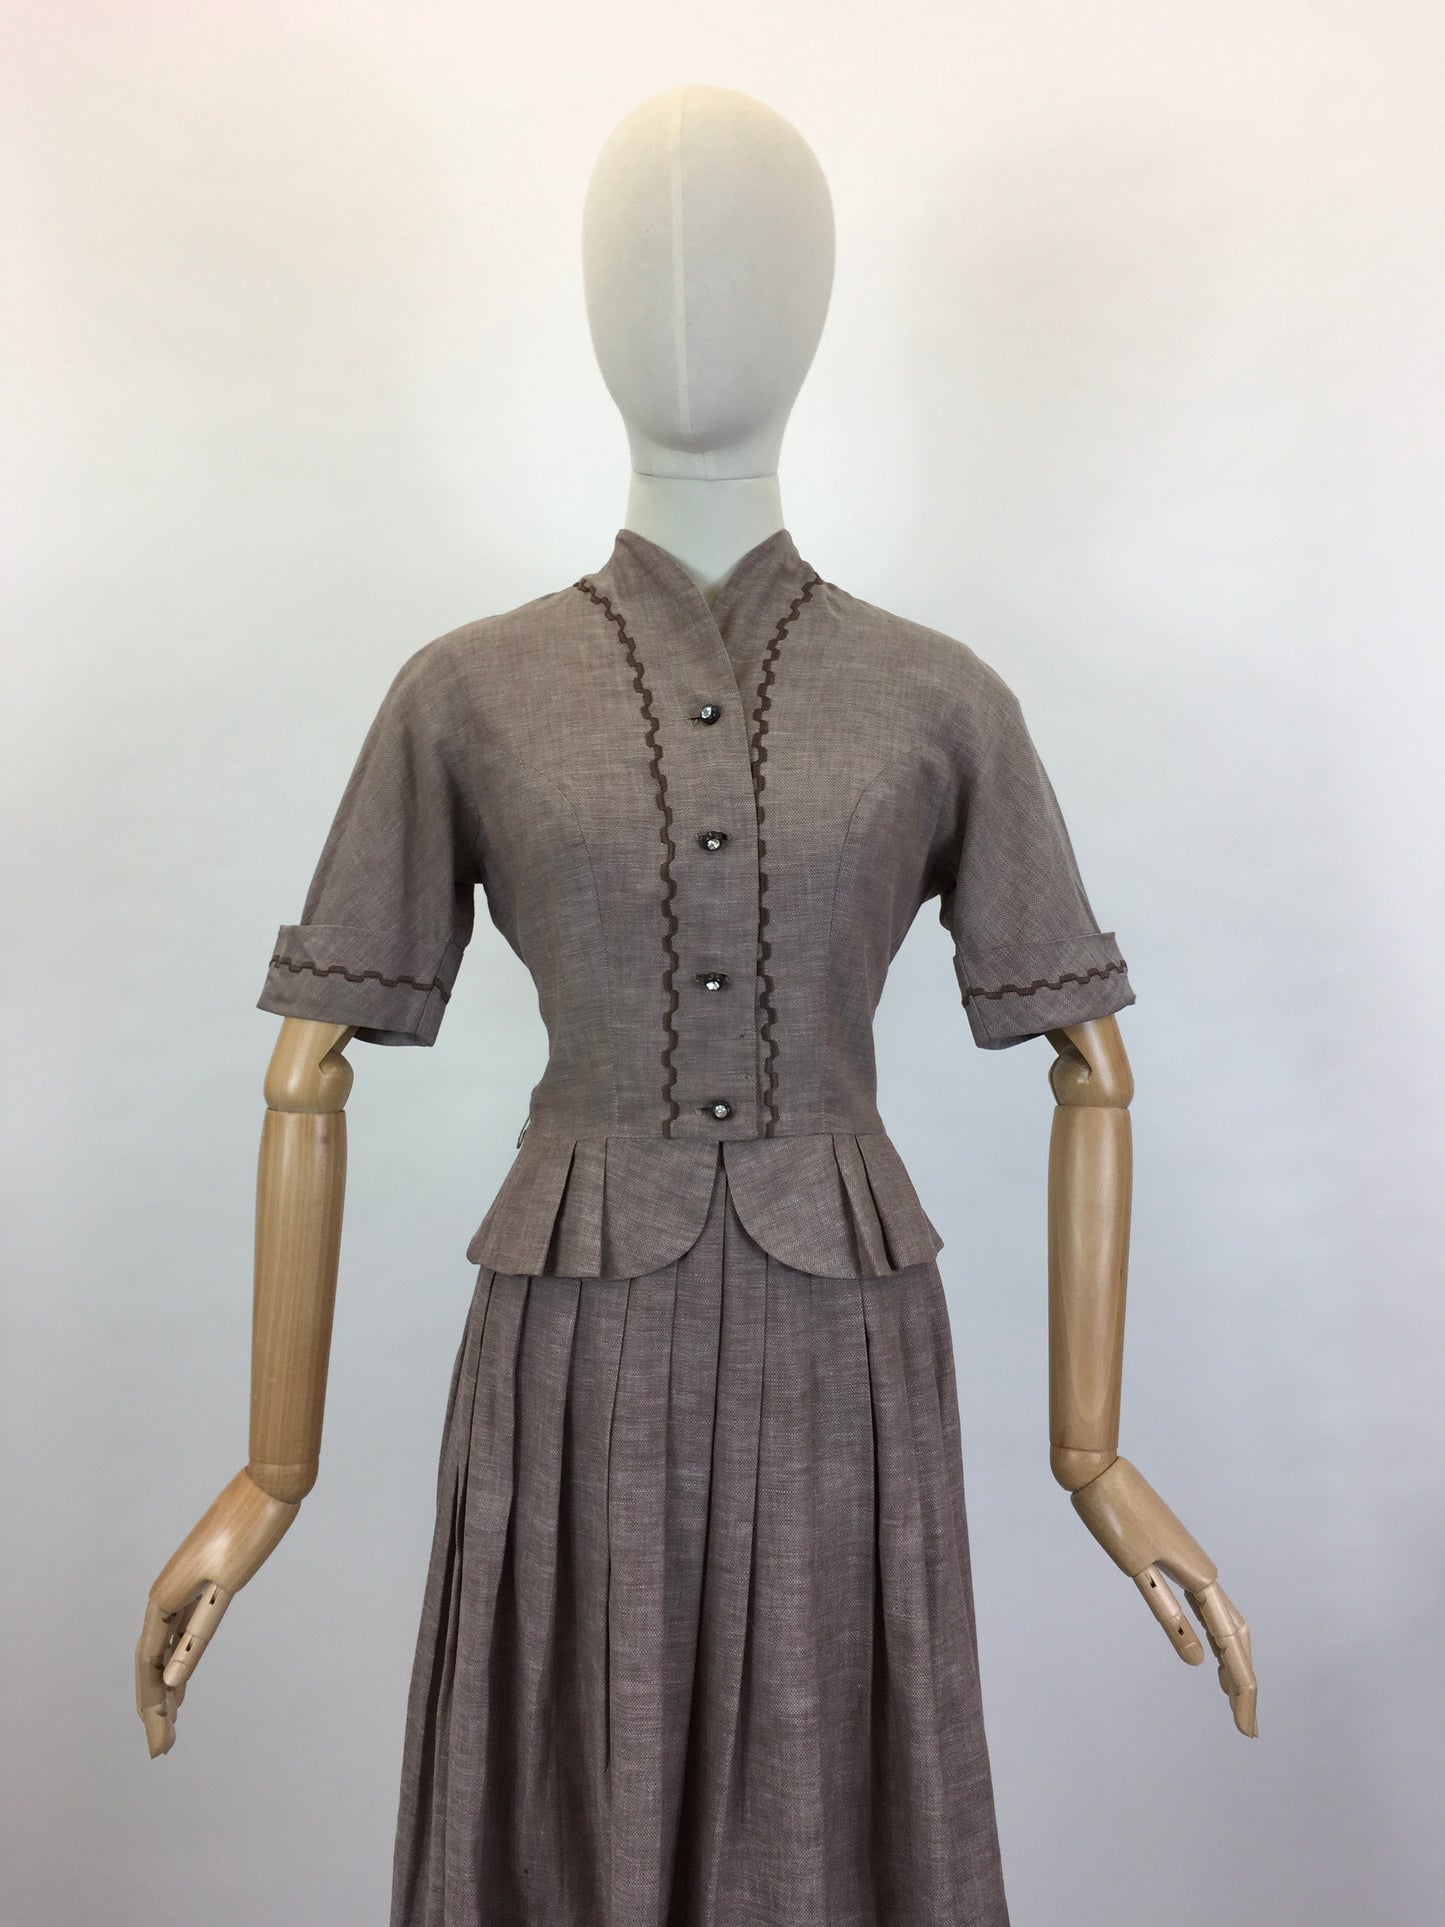 Original 1940’s Darling 2pc Summer Suit - In A Lightweight Soft Brown Cotton With Stunning Details